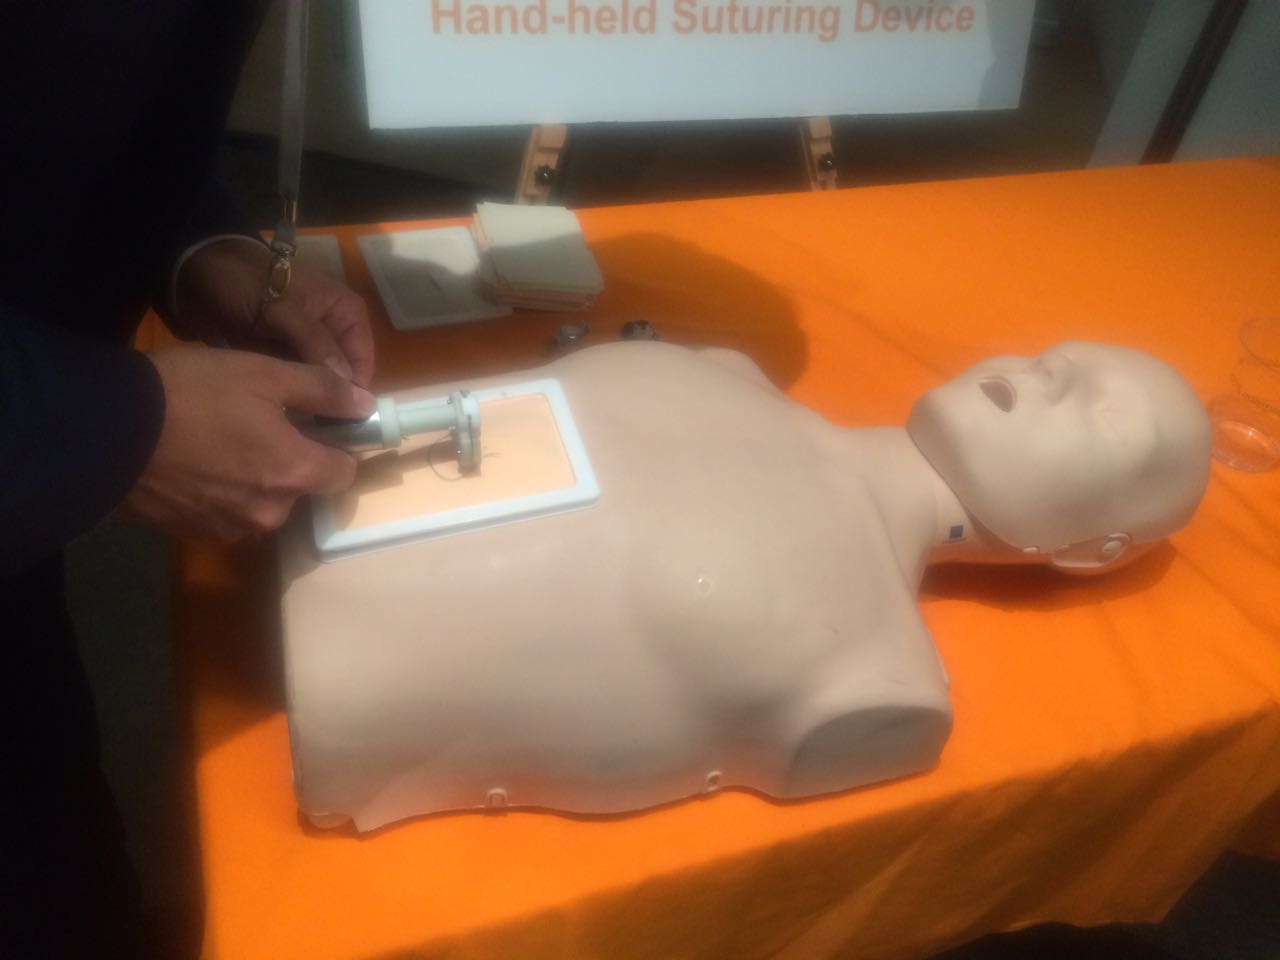 The handheld automated suturing device tested on a surgical mannequin.